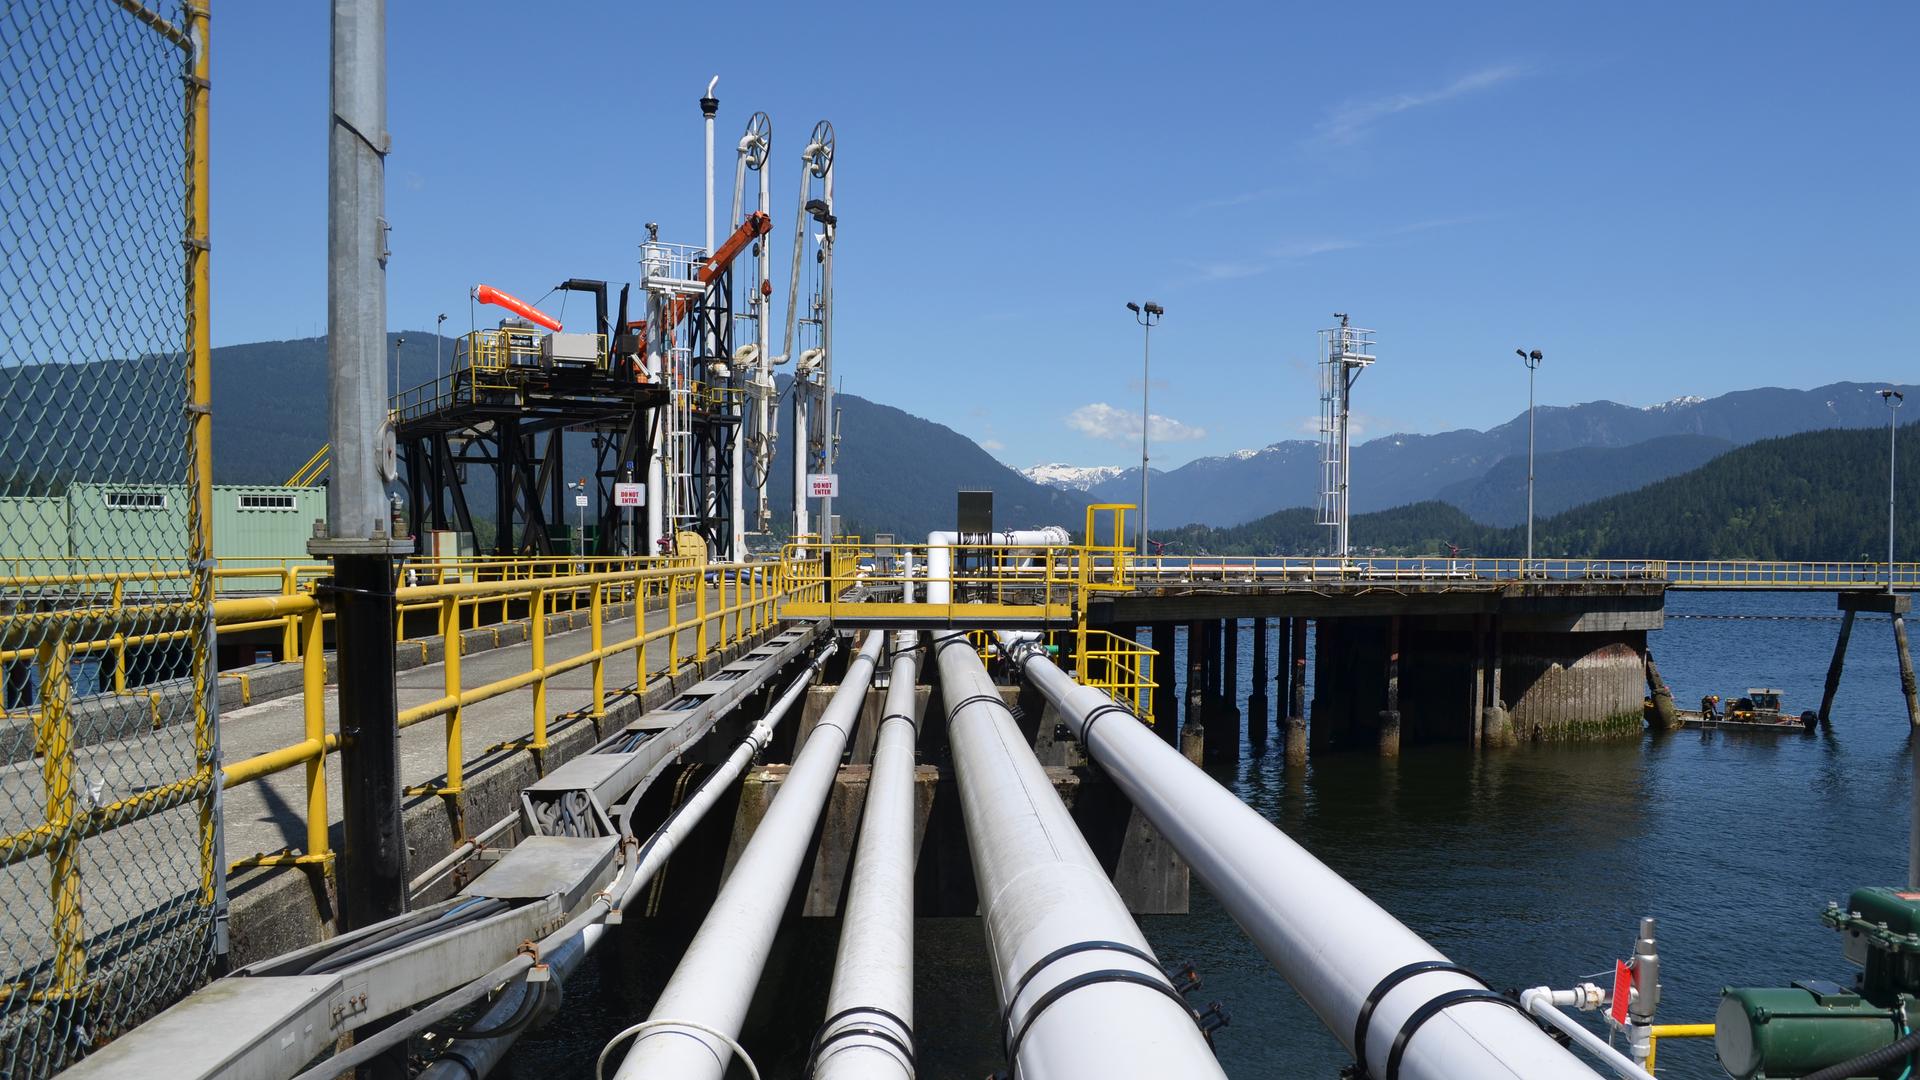 Oil flows through pipes to the Westridge Marine near Vancouver, BC. A second, much larger pipeline here is part of Canadian prime minister Justin Trudeau's plan to increase exports of oil from Alberta's tar sands region. Opponents say that would increase 